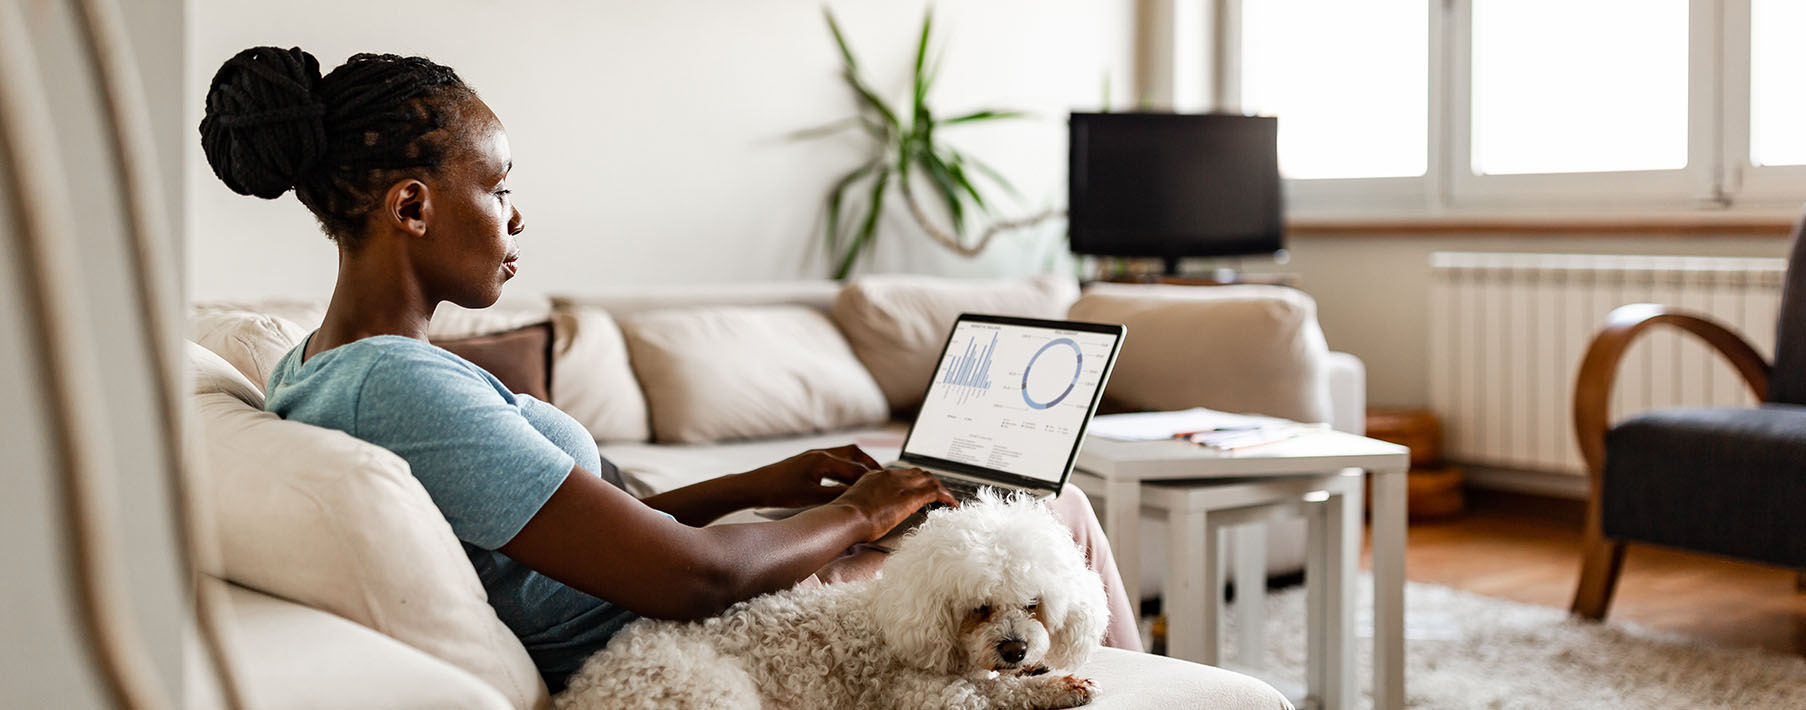 A Woman sits on a couch working on a laptop with a dog curled up by her side